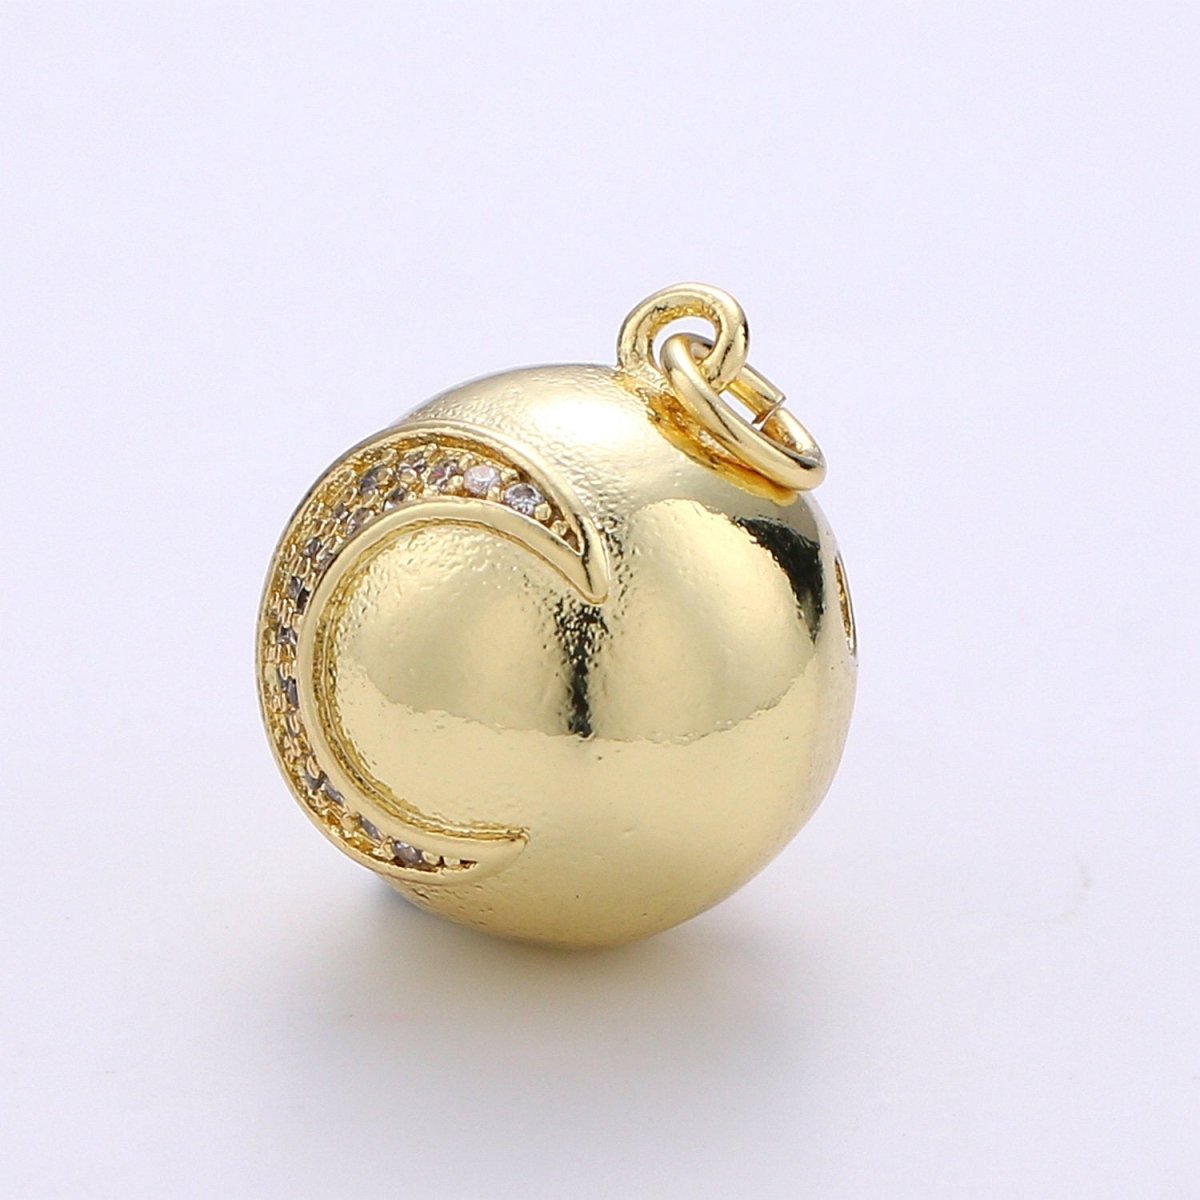 Micro Pave Moon Charm Crescent Moon Charm Ball Charm Ornament Moon Pendant 14K Gold Filled Celestial Necklace Bracelet Charm Jewelry Making, D-704 - DLUXCA